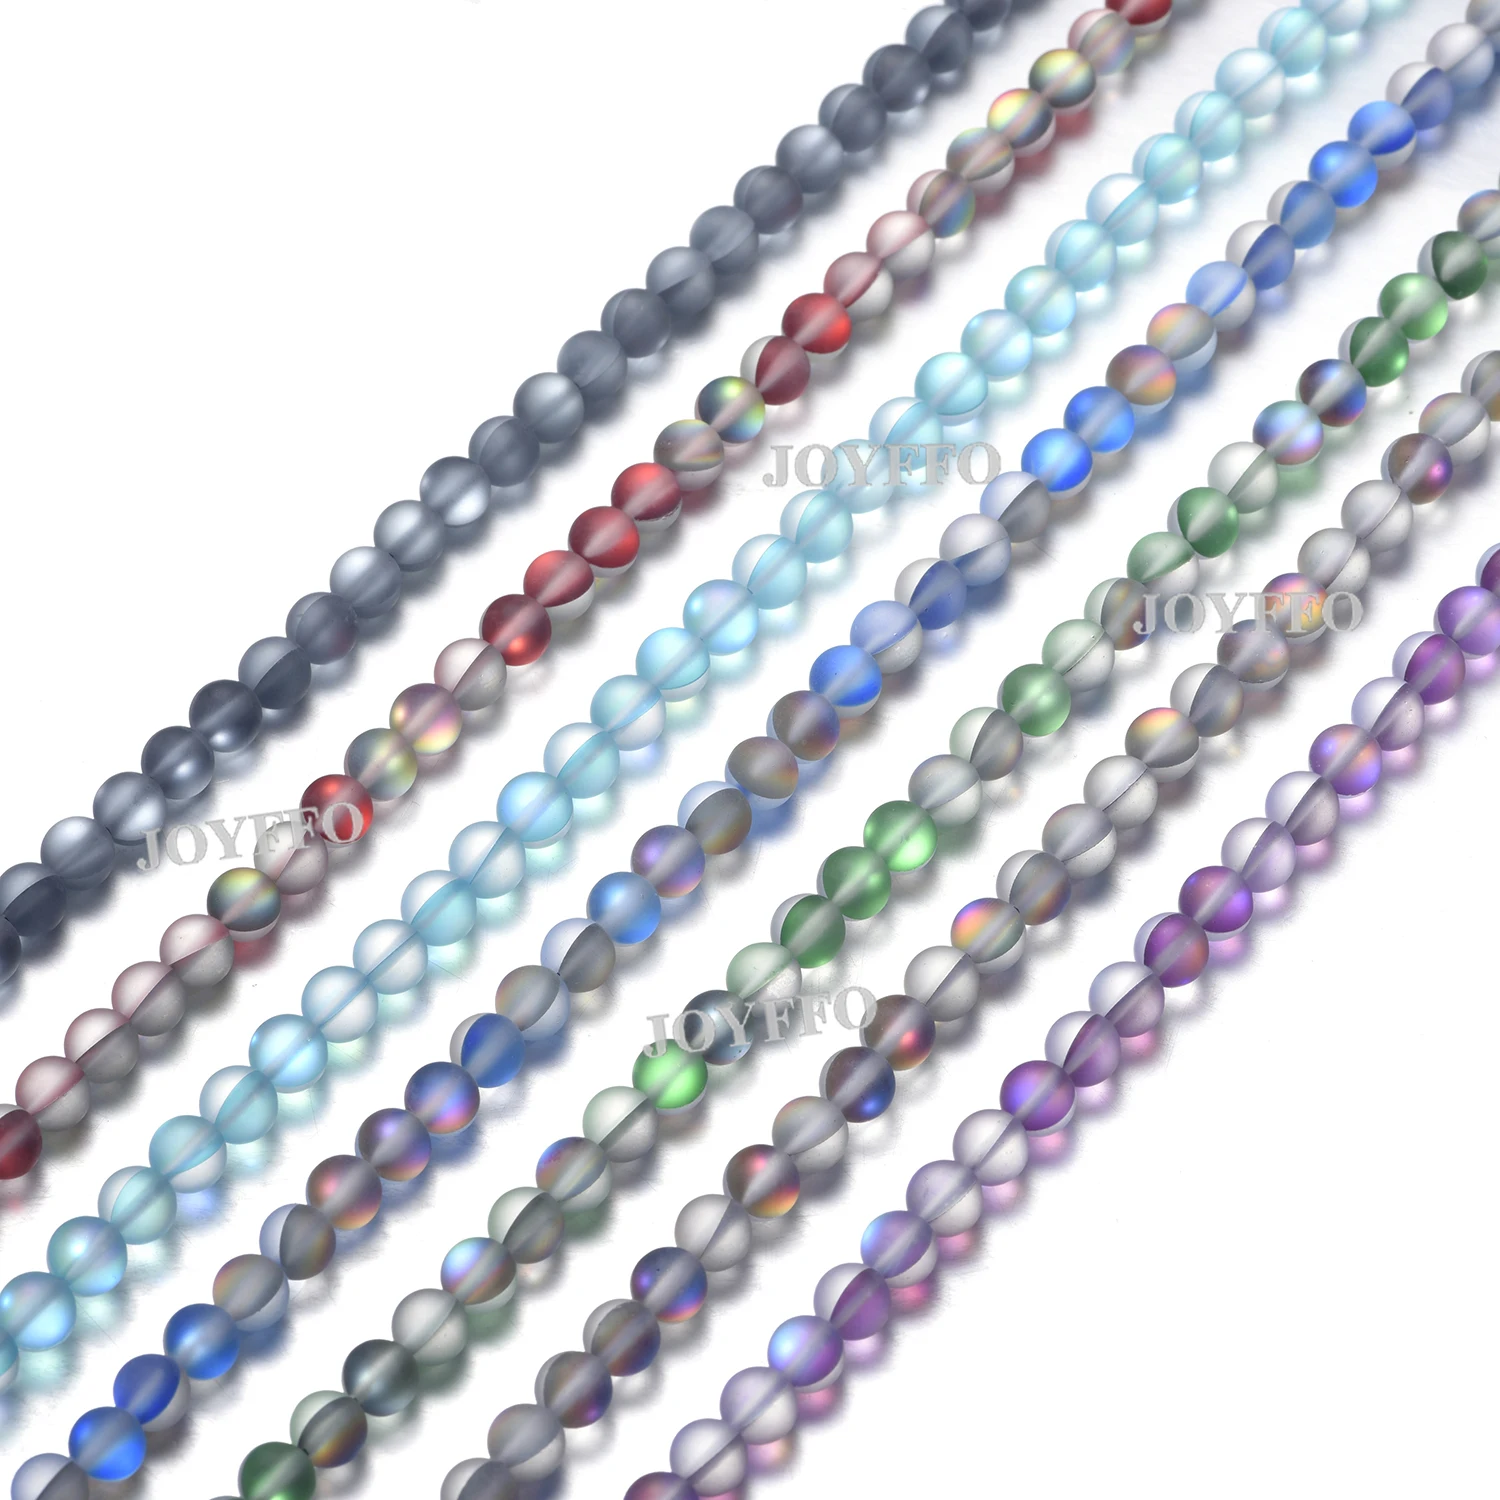 

2020 Hot Faceted Round Assorted Color Agate Beads Natural Rainbow Moonstone Gemstone Round Quartz Loose Beads For DIY Jewelry, Picture